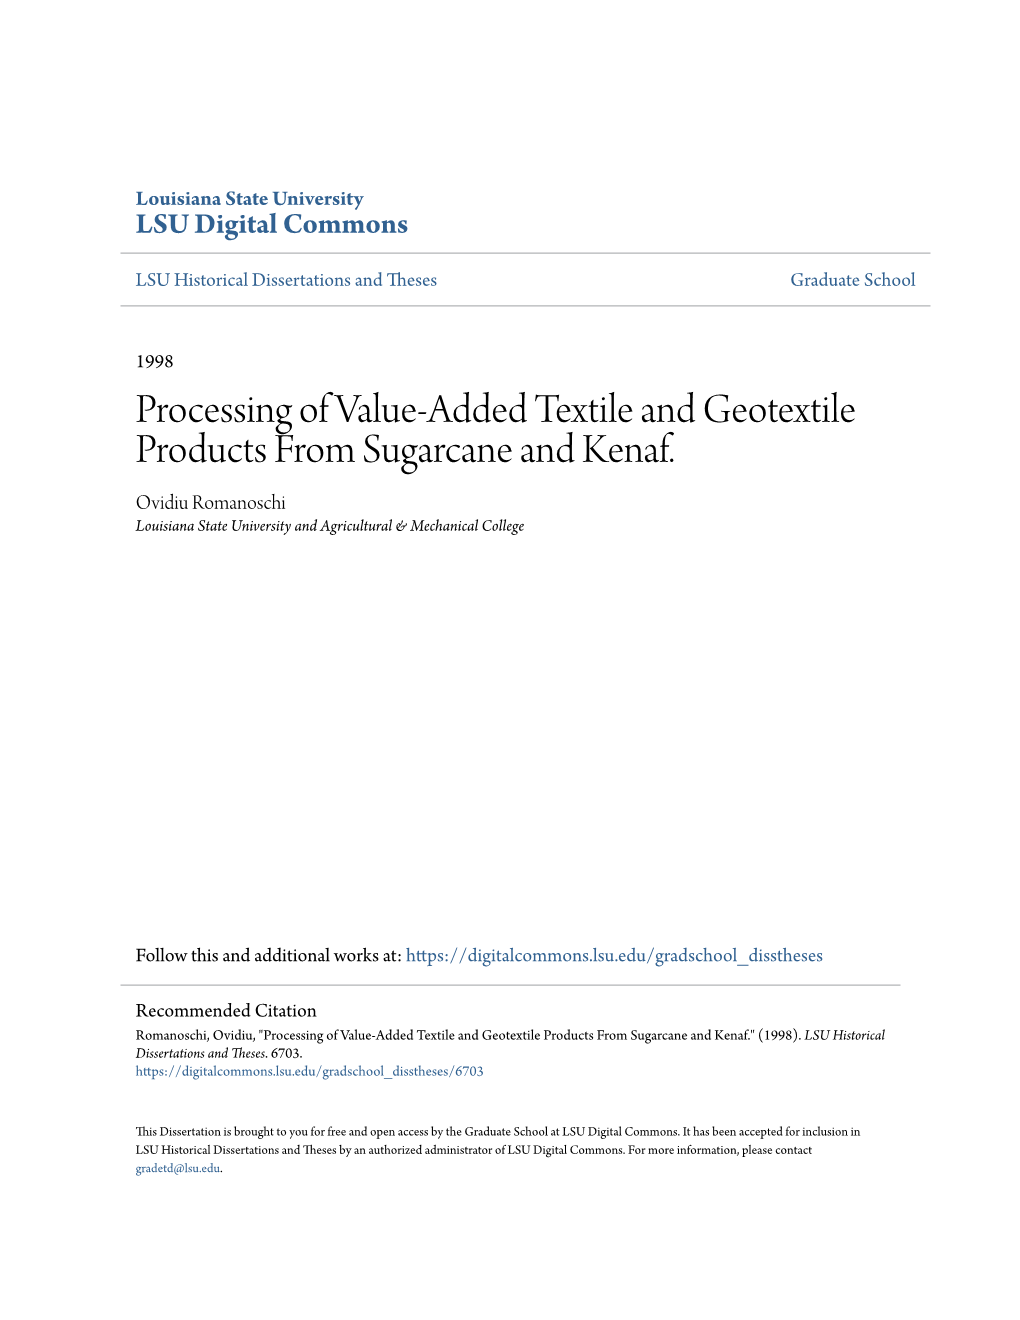 Processing of Value-Added Textile and Geotextile Products from Sugarcane and Kenaf